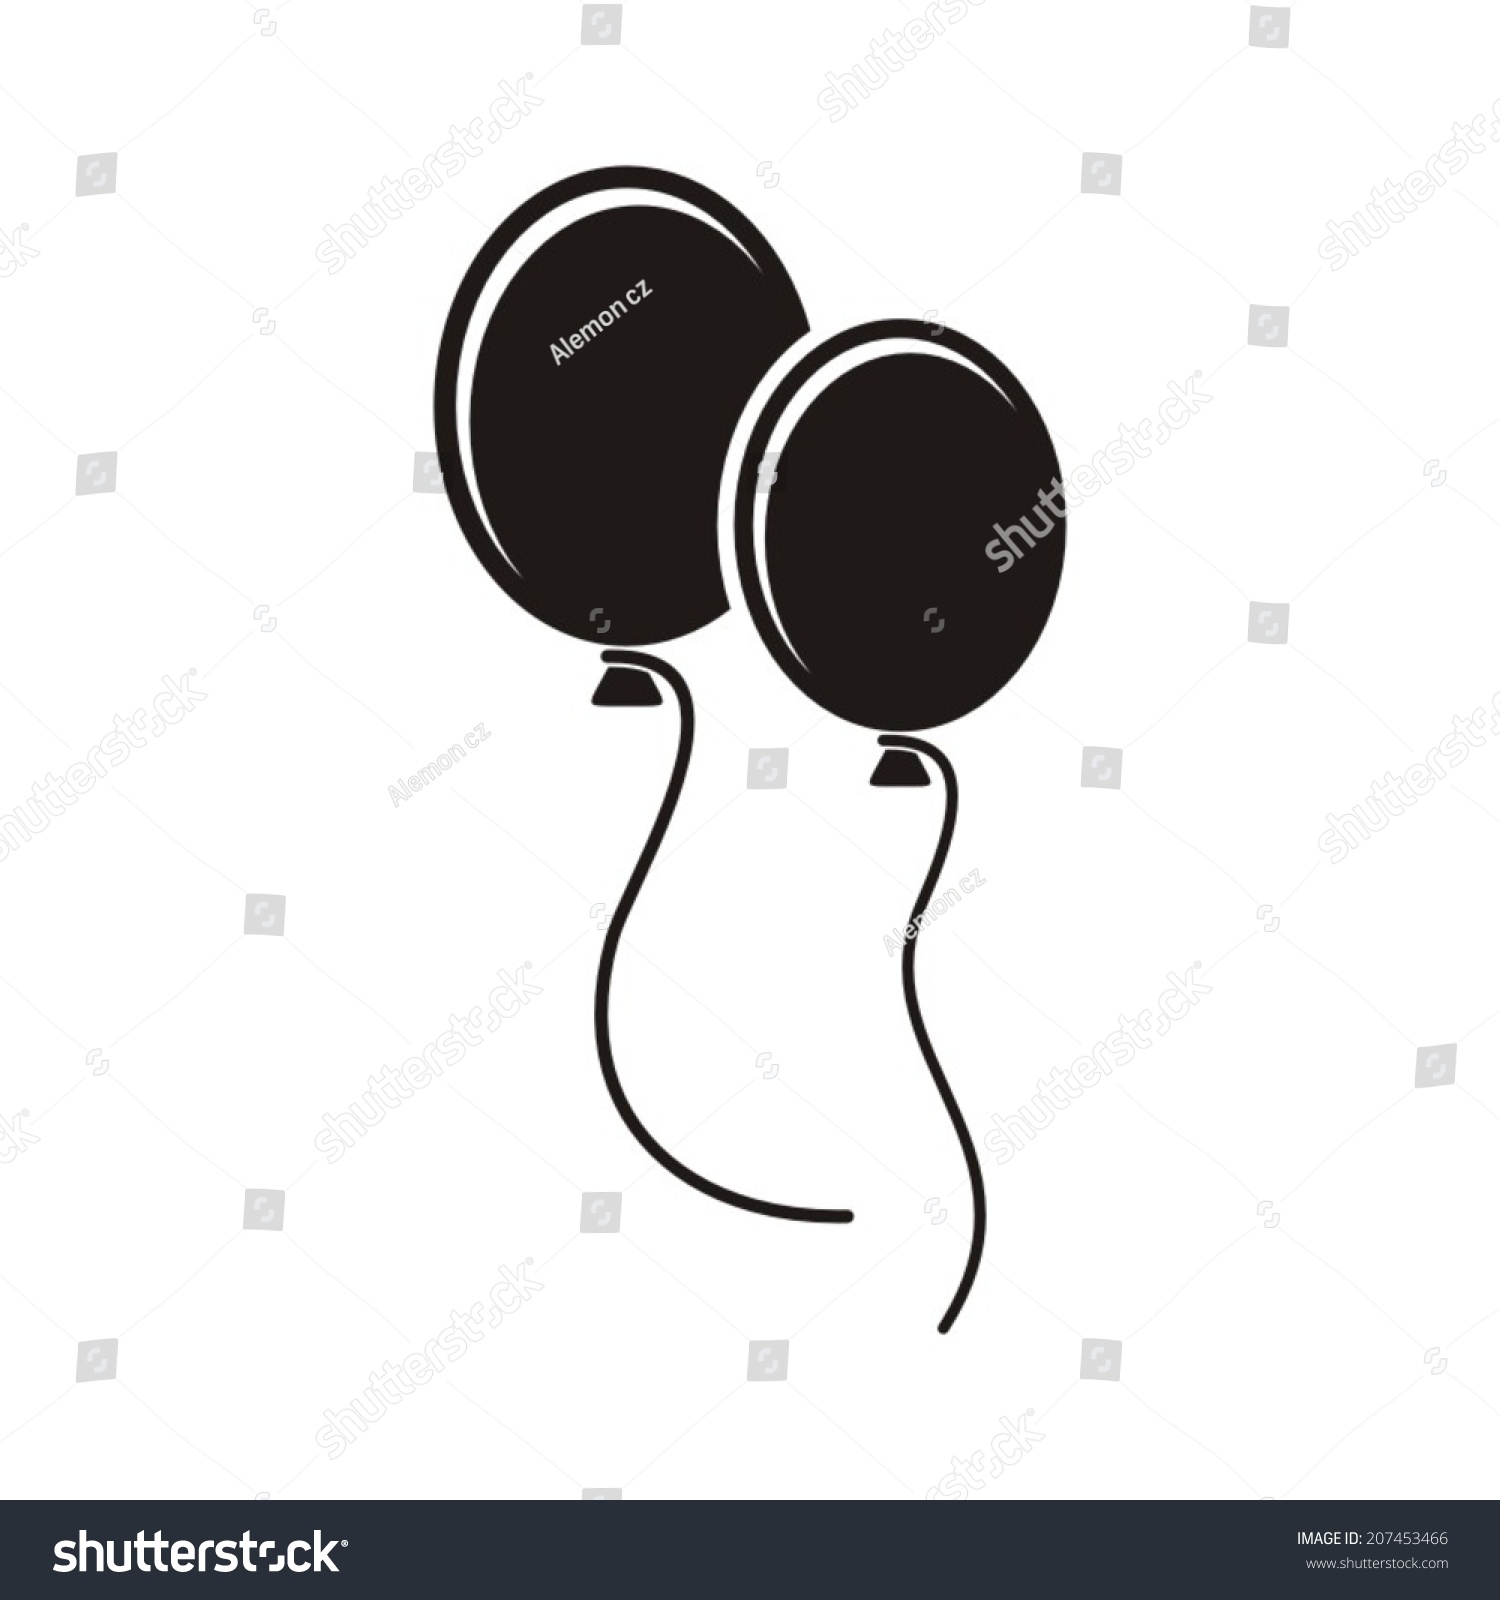 Download Black Vector Party Balloons Icon On Stock Vector (Royalty ...